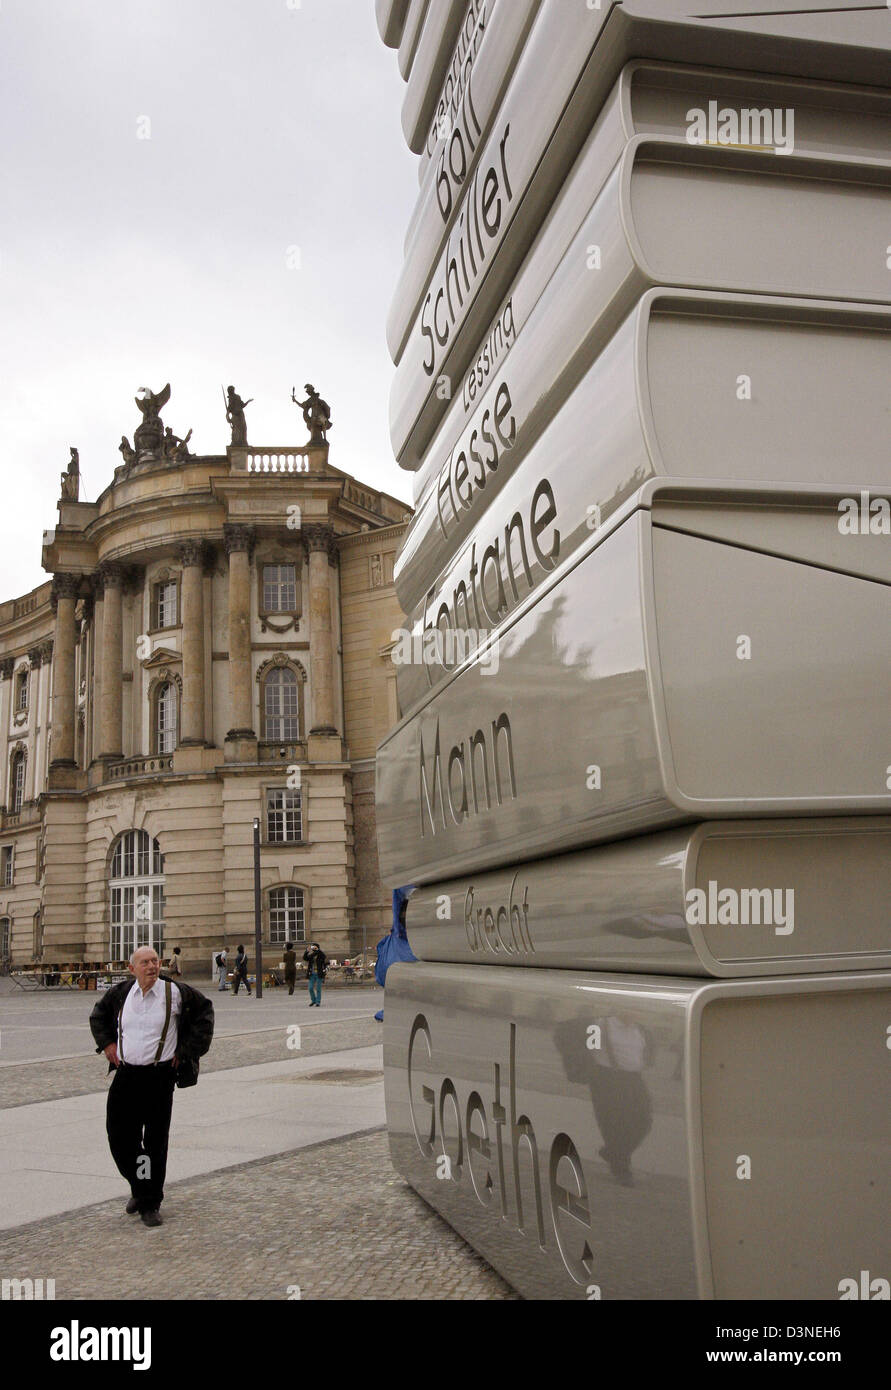 The picture shows a book sculpture of twelve metres height at the Bebelplatz in Berlin, Germany, Friday 21 April 2006. The sculpture titled 'The modern printing' is part of the image campaign 'Country of Ideas' ('Land der Ideen') for the soccer world cup in Germany. The location of the sculpture commemorates the book burning by the Nazis on 10 May 1933. Photo: Bernd Settnik Stock Photo